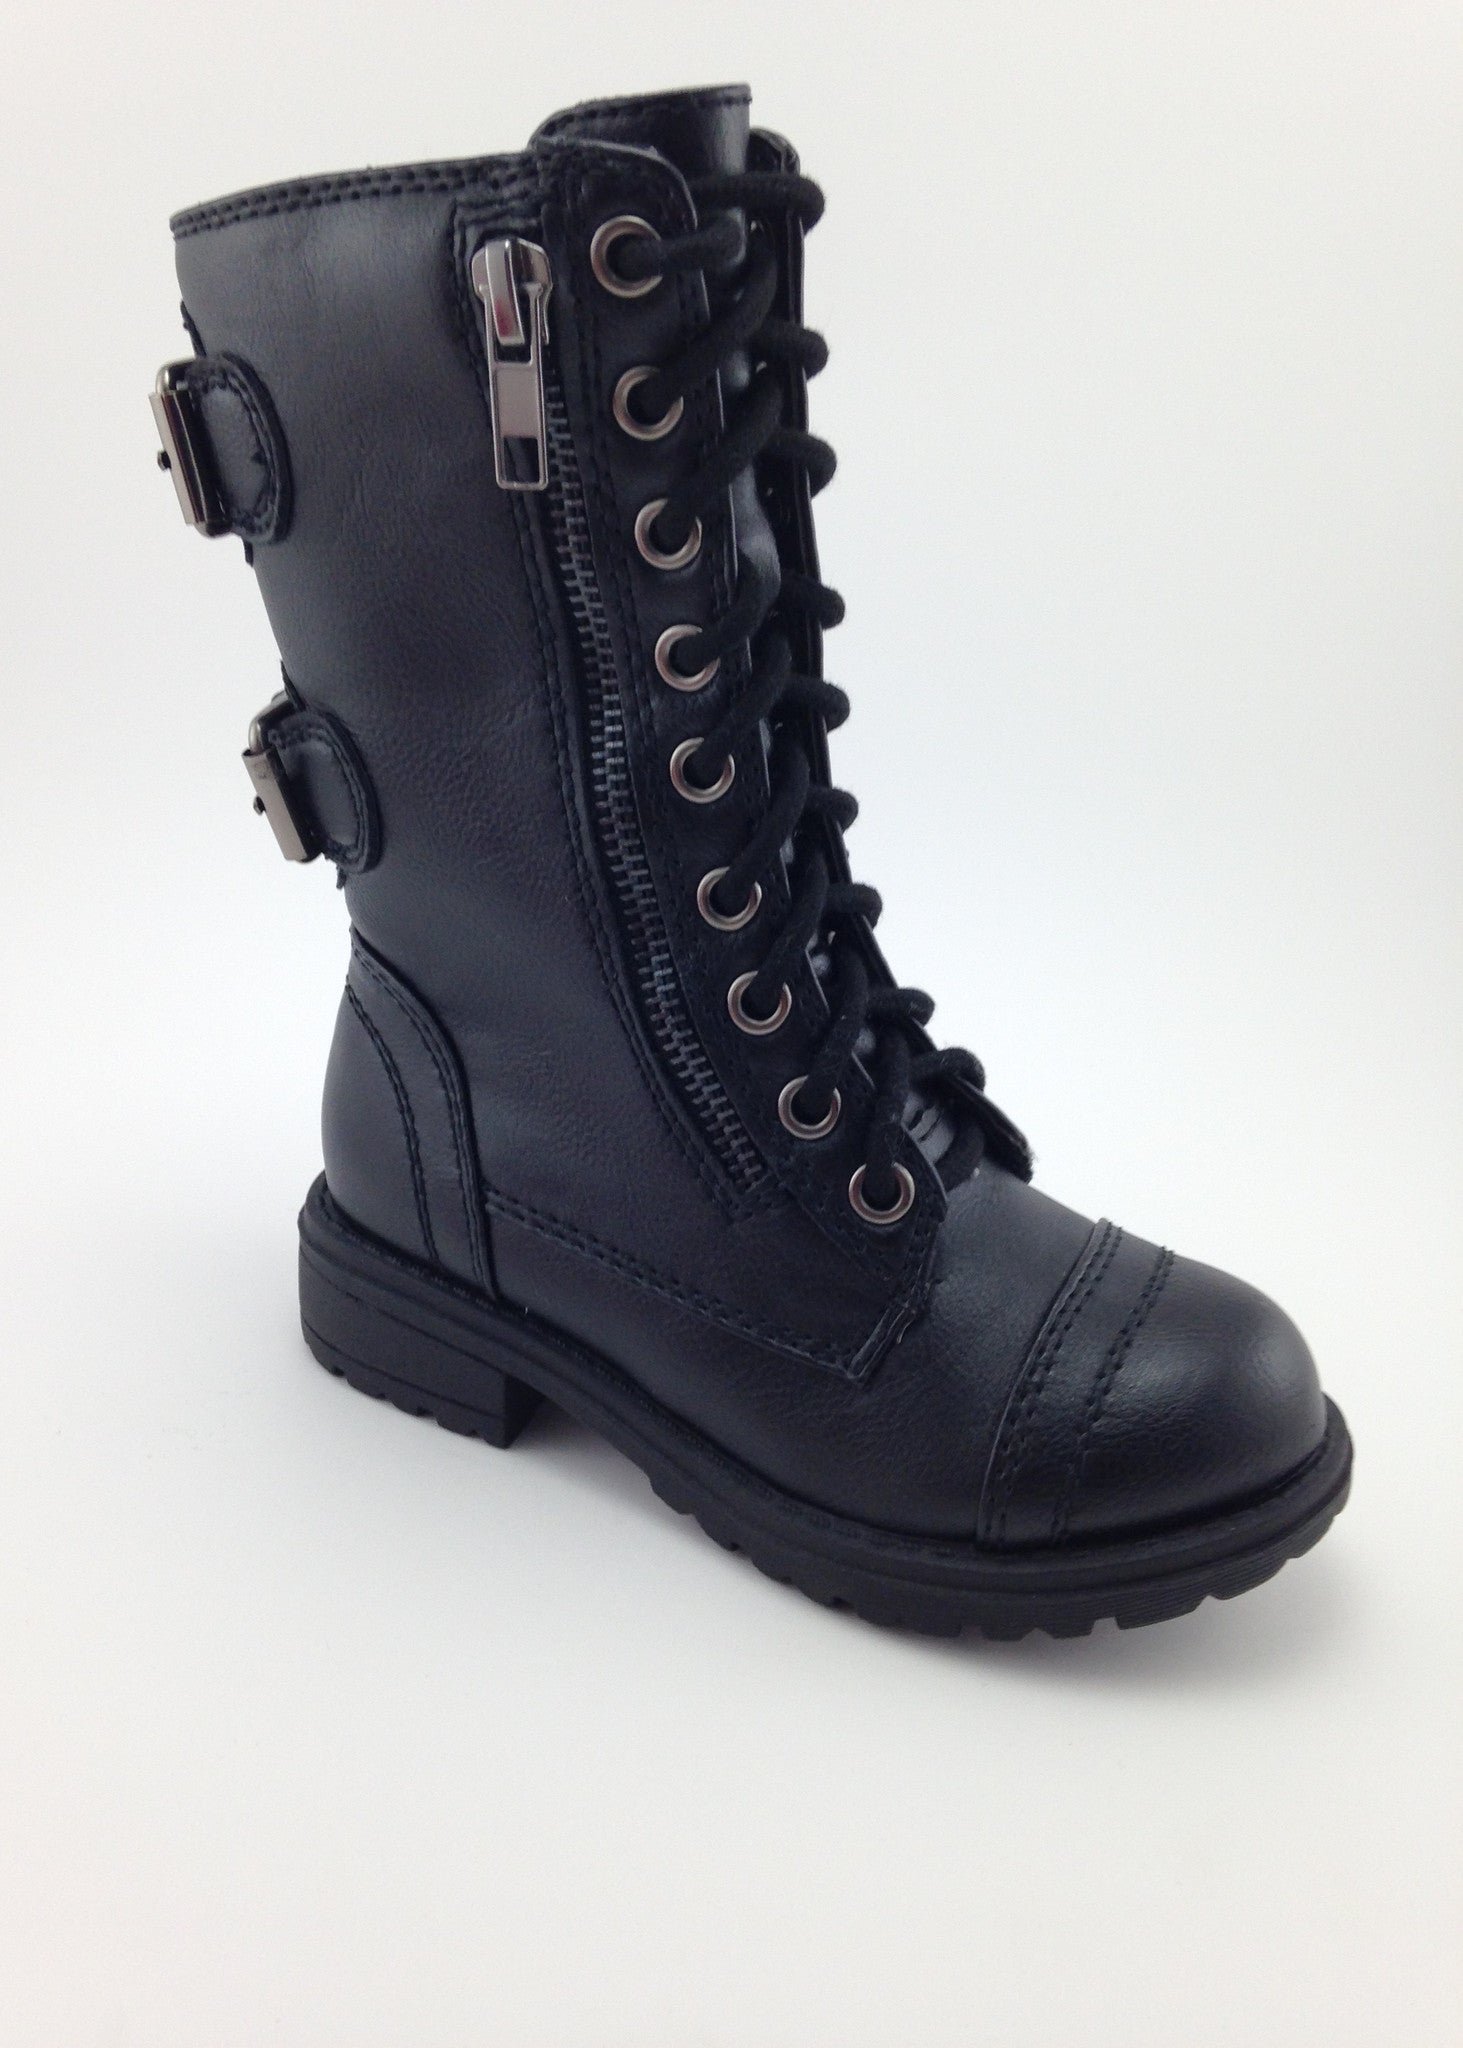 Girls Black Military Boots | Military 